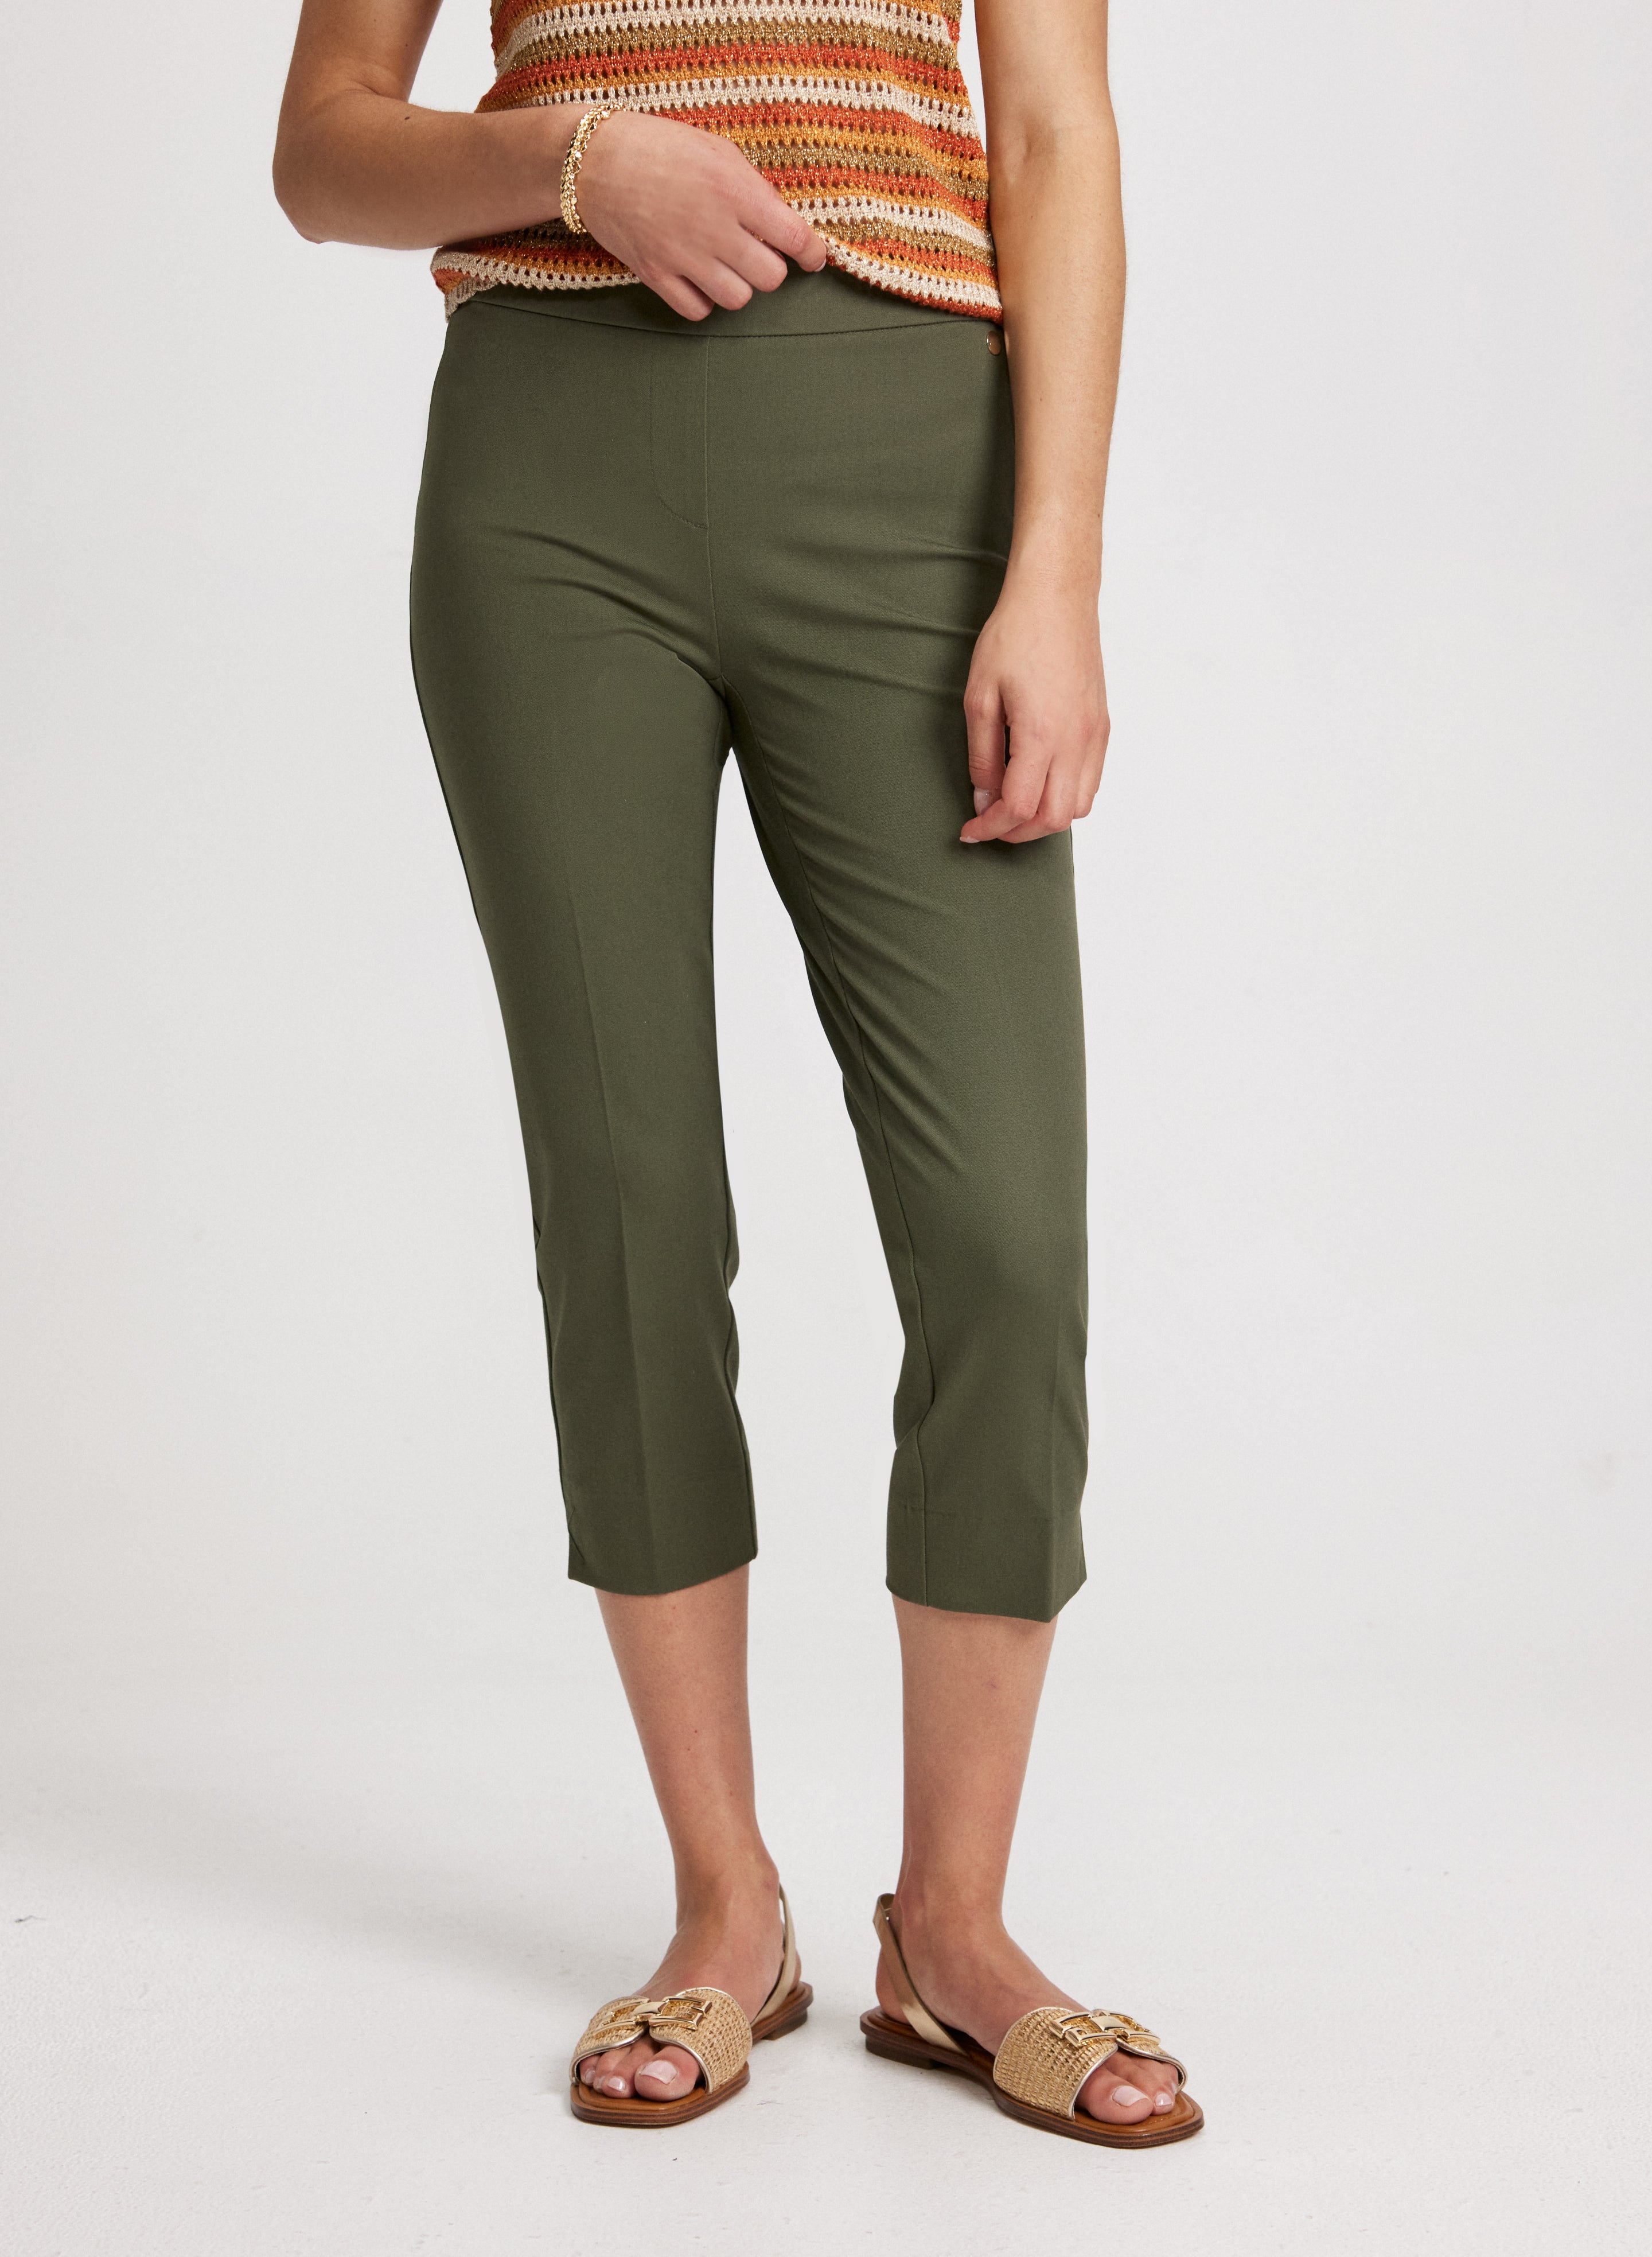 Lateral Slit Pull-On Capris